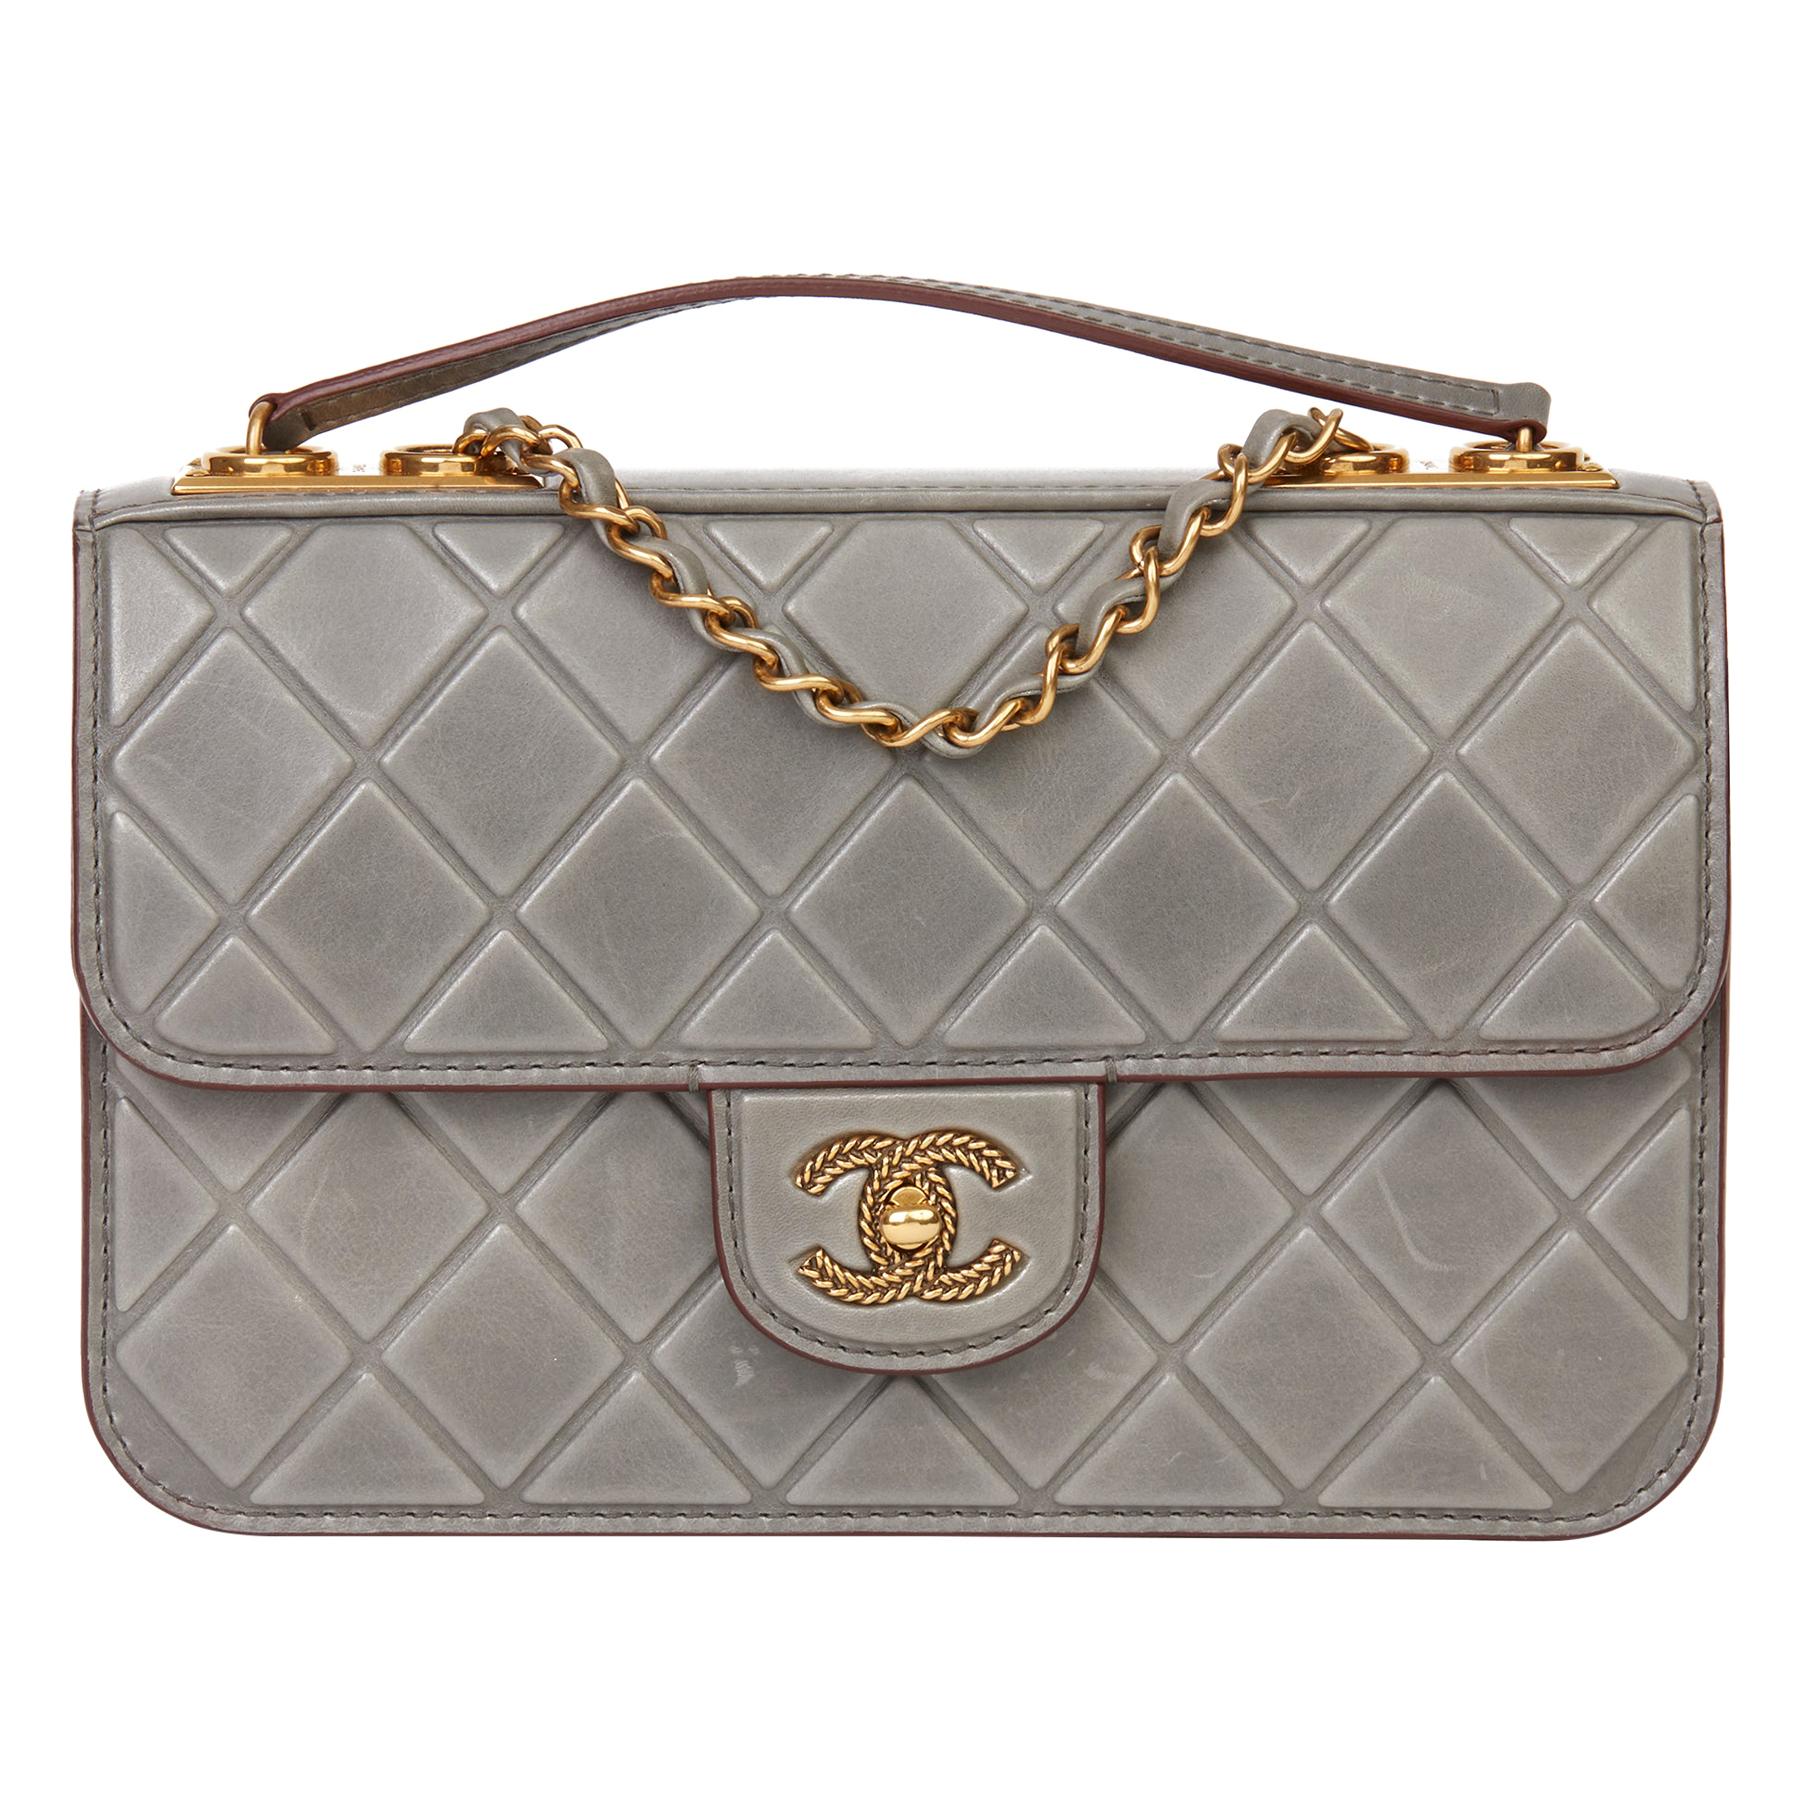 Chanel Grey Quilted Debossed Aged Calfskin Leather Classic Single Flap Bag